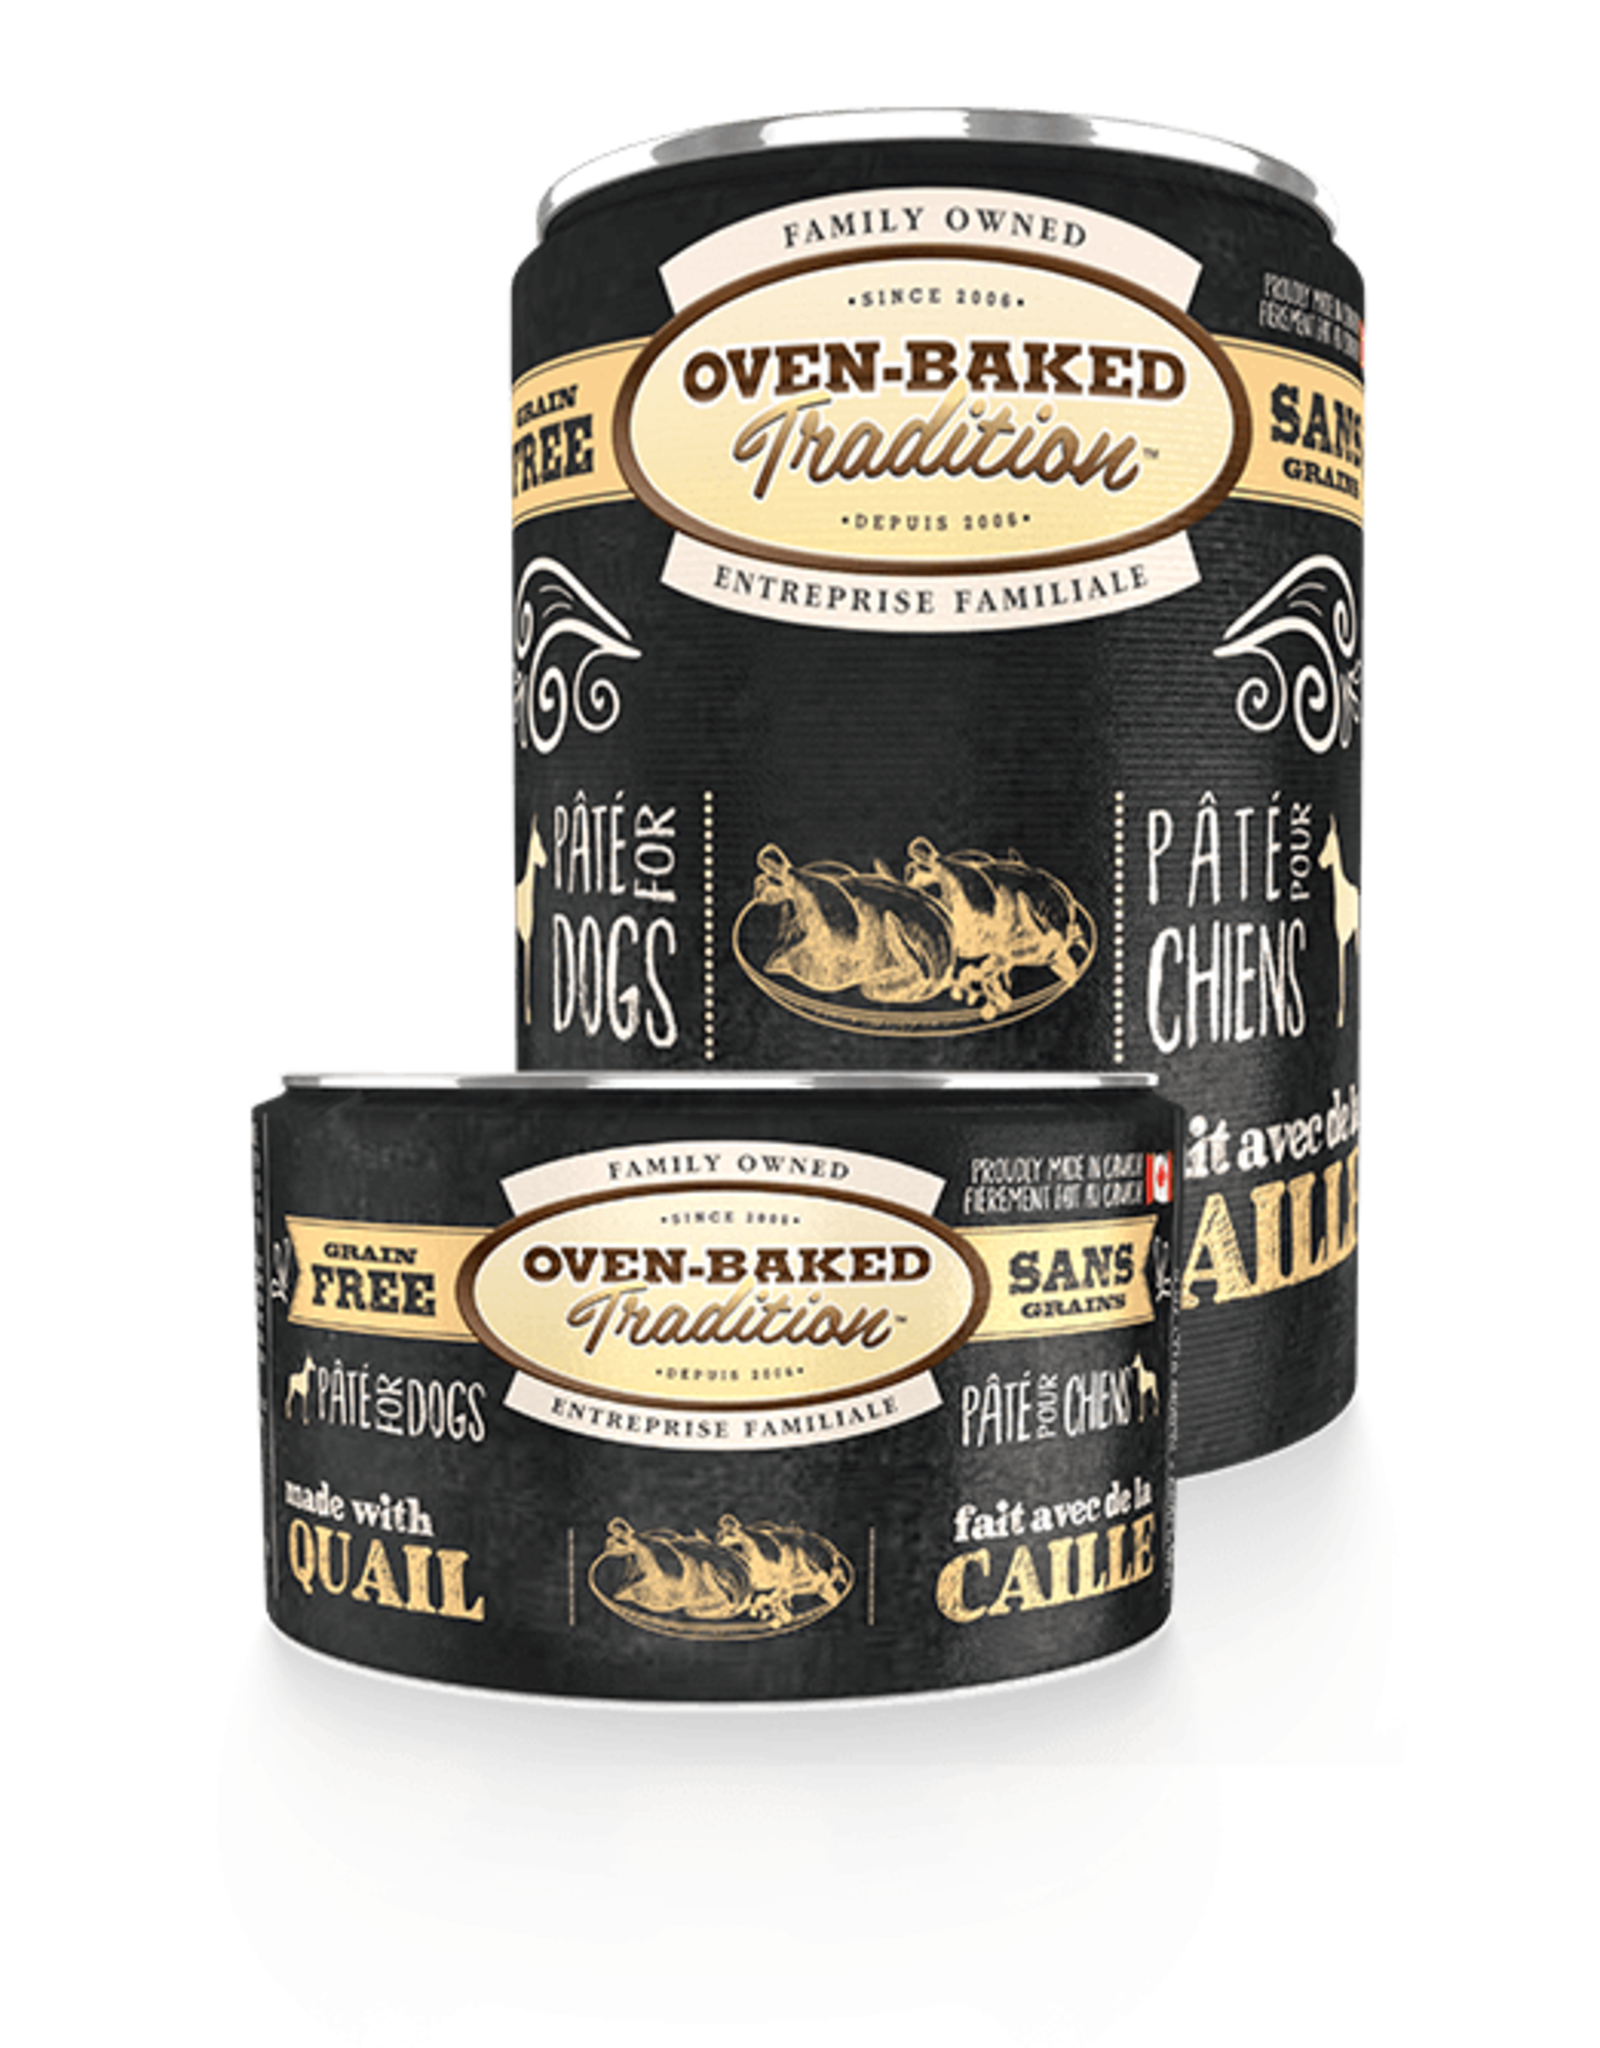 Oven-Baked Tradition Oven-Baked Paté Caille 12.5oz